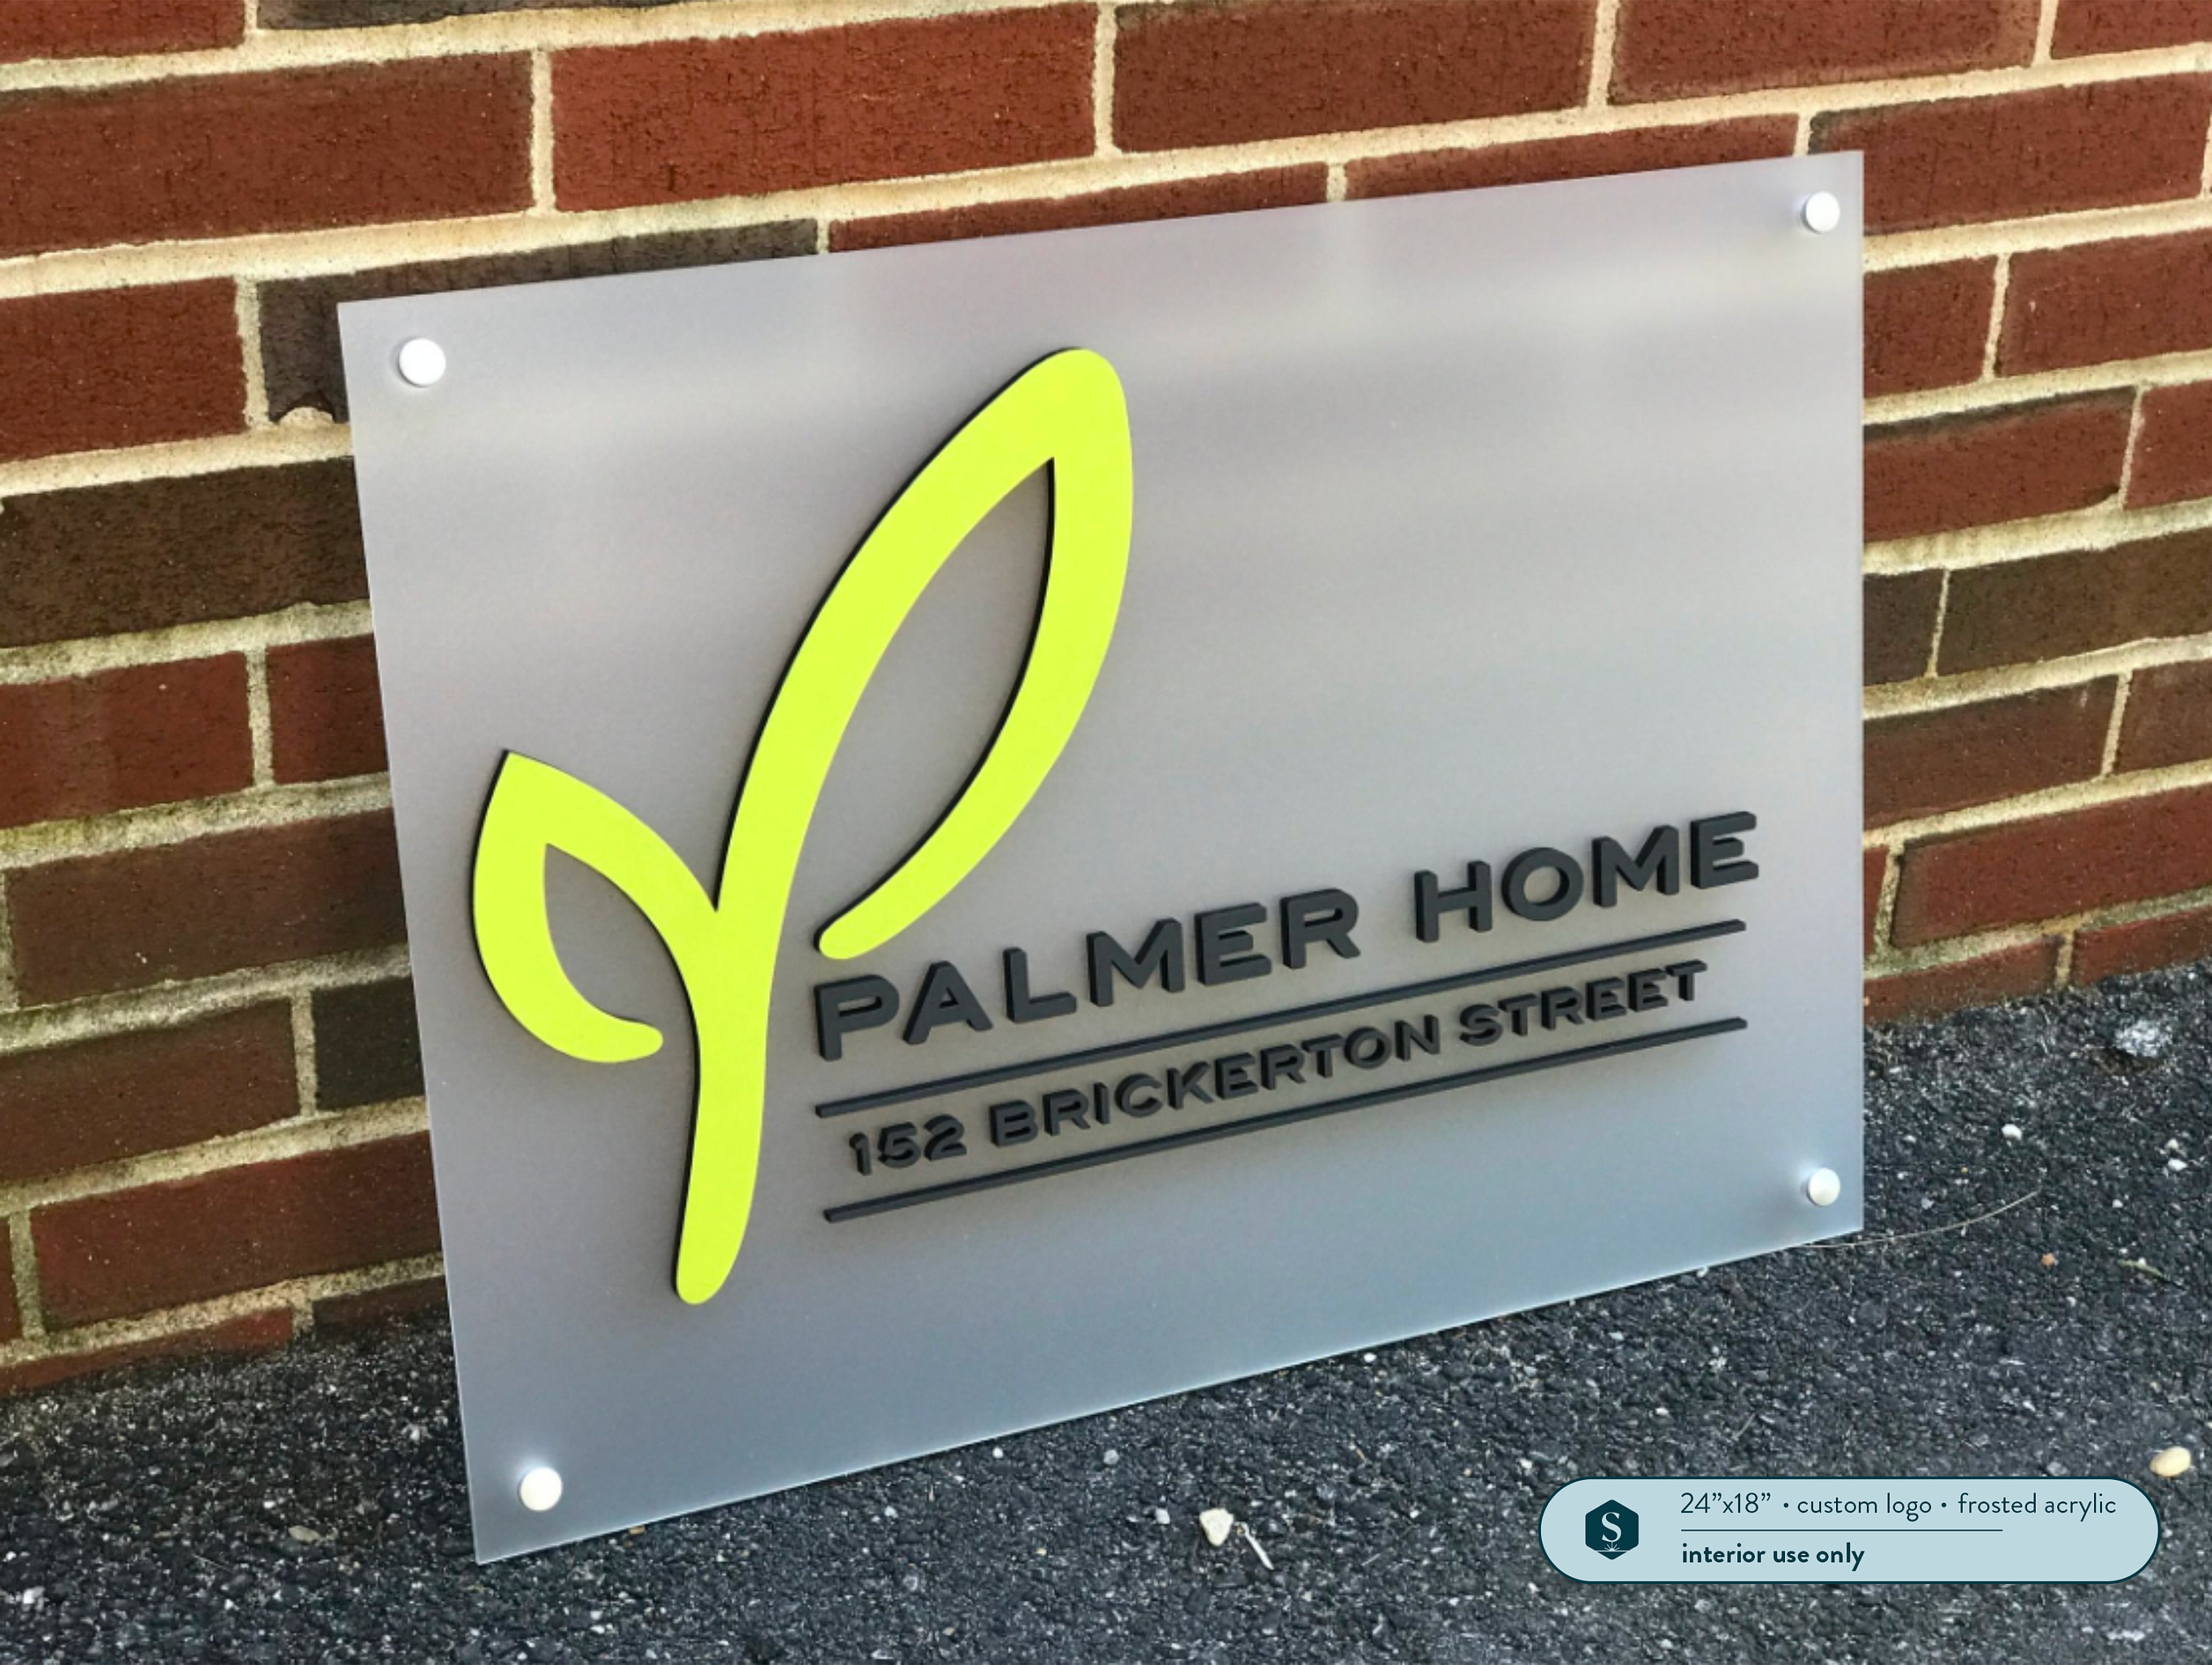 Laser Cut Acrylic Letters Signage - Easy Install - Online Designer - Custom Acrylic Lettering for Trade Shows, Business, & School Events by BannerBuzz